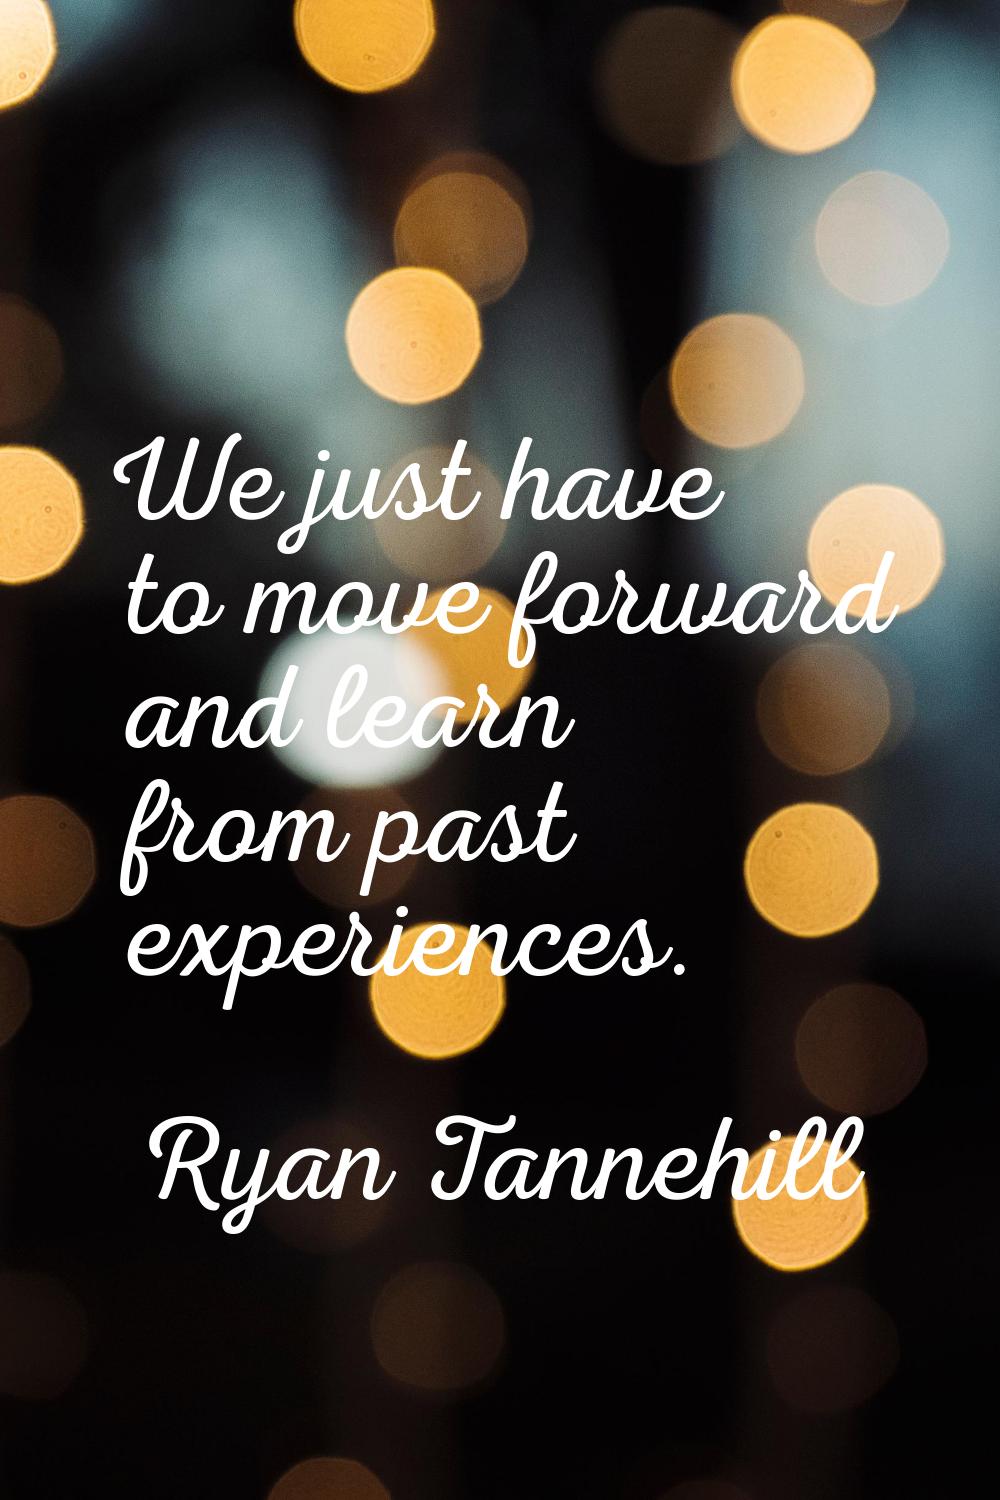 We just have to move forward and learn from past experiences.